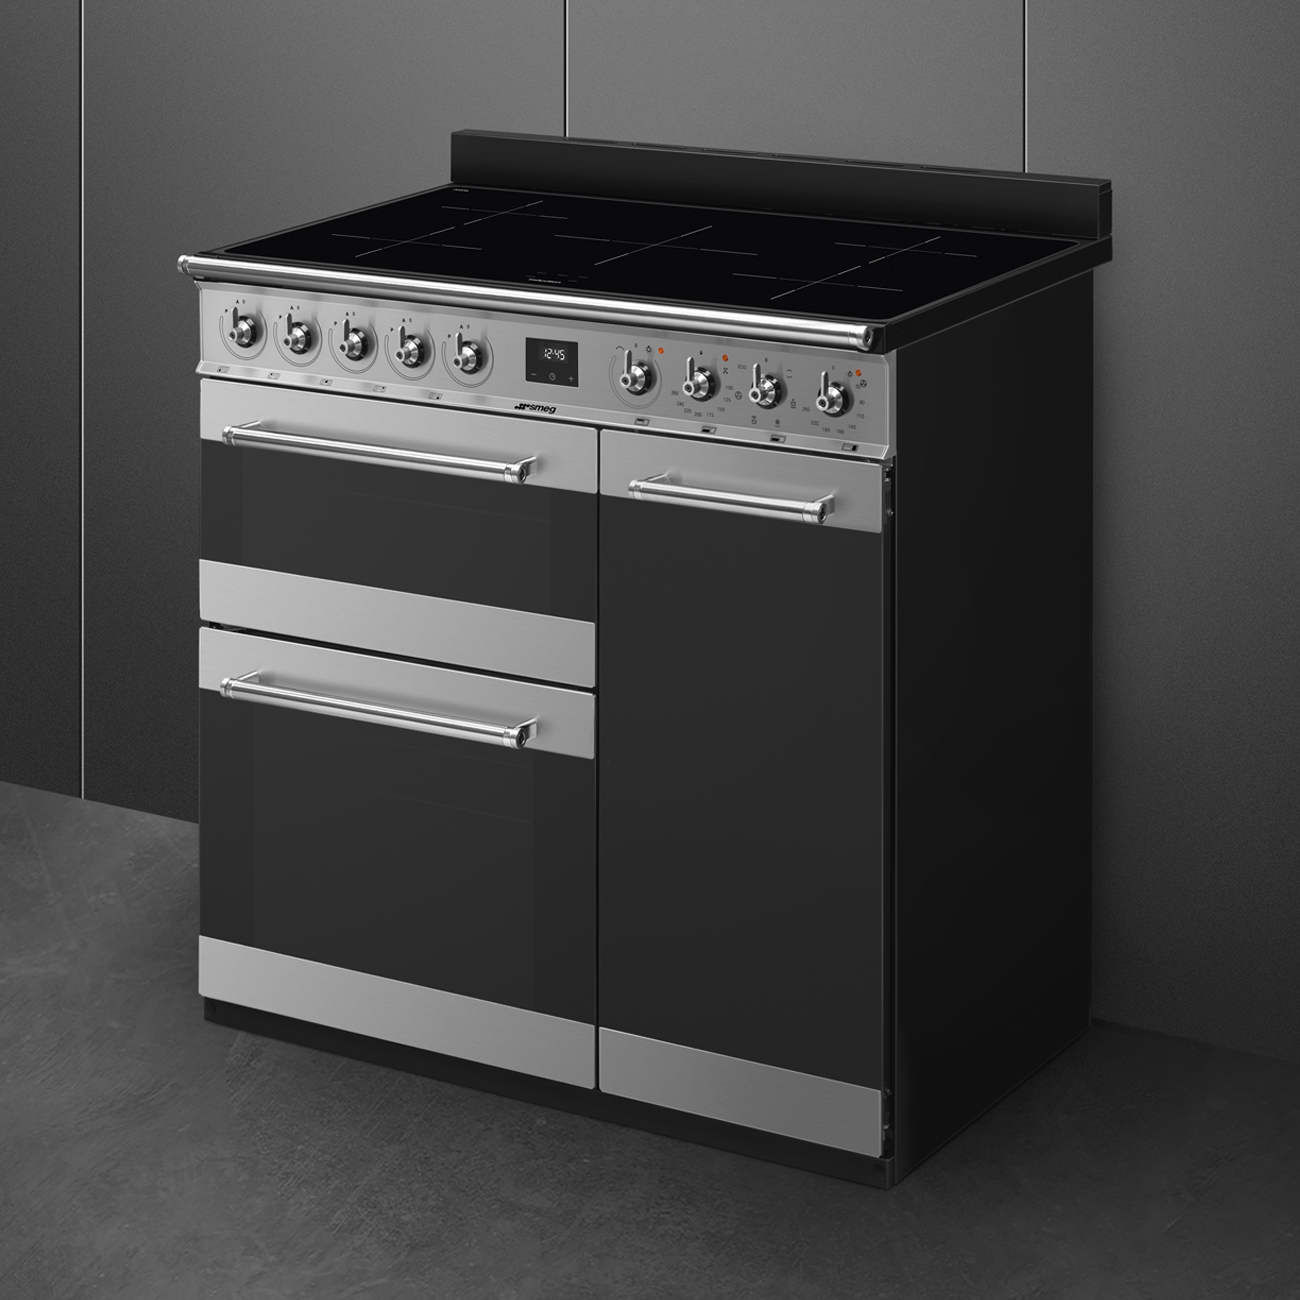 Smeg Stainless steel Cooker with Induction Hob_3